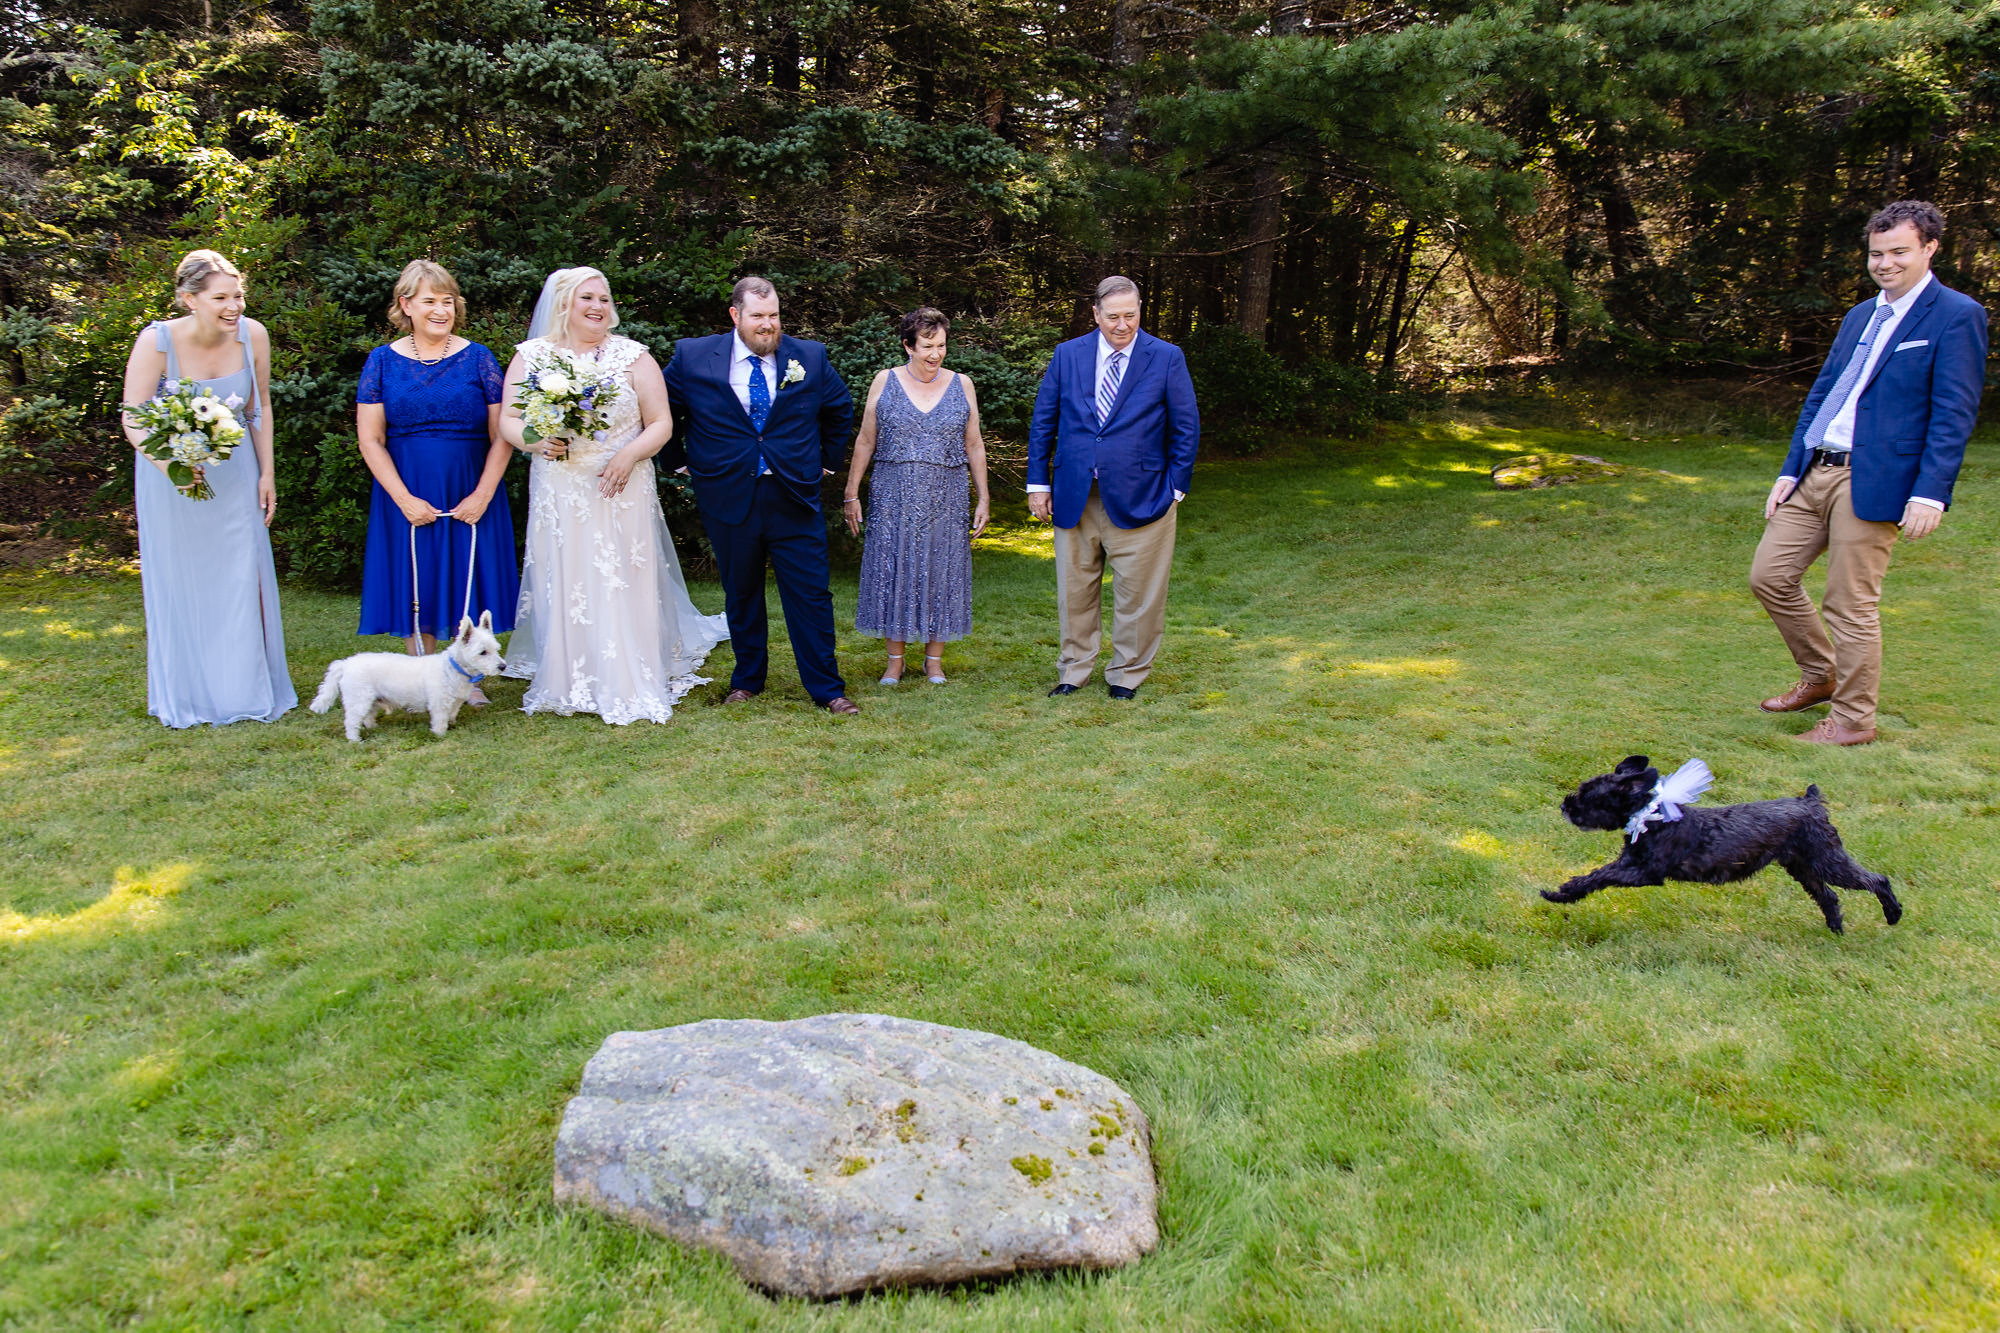 A pup interrupts portraits at an intimate wedding on MDI